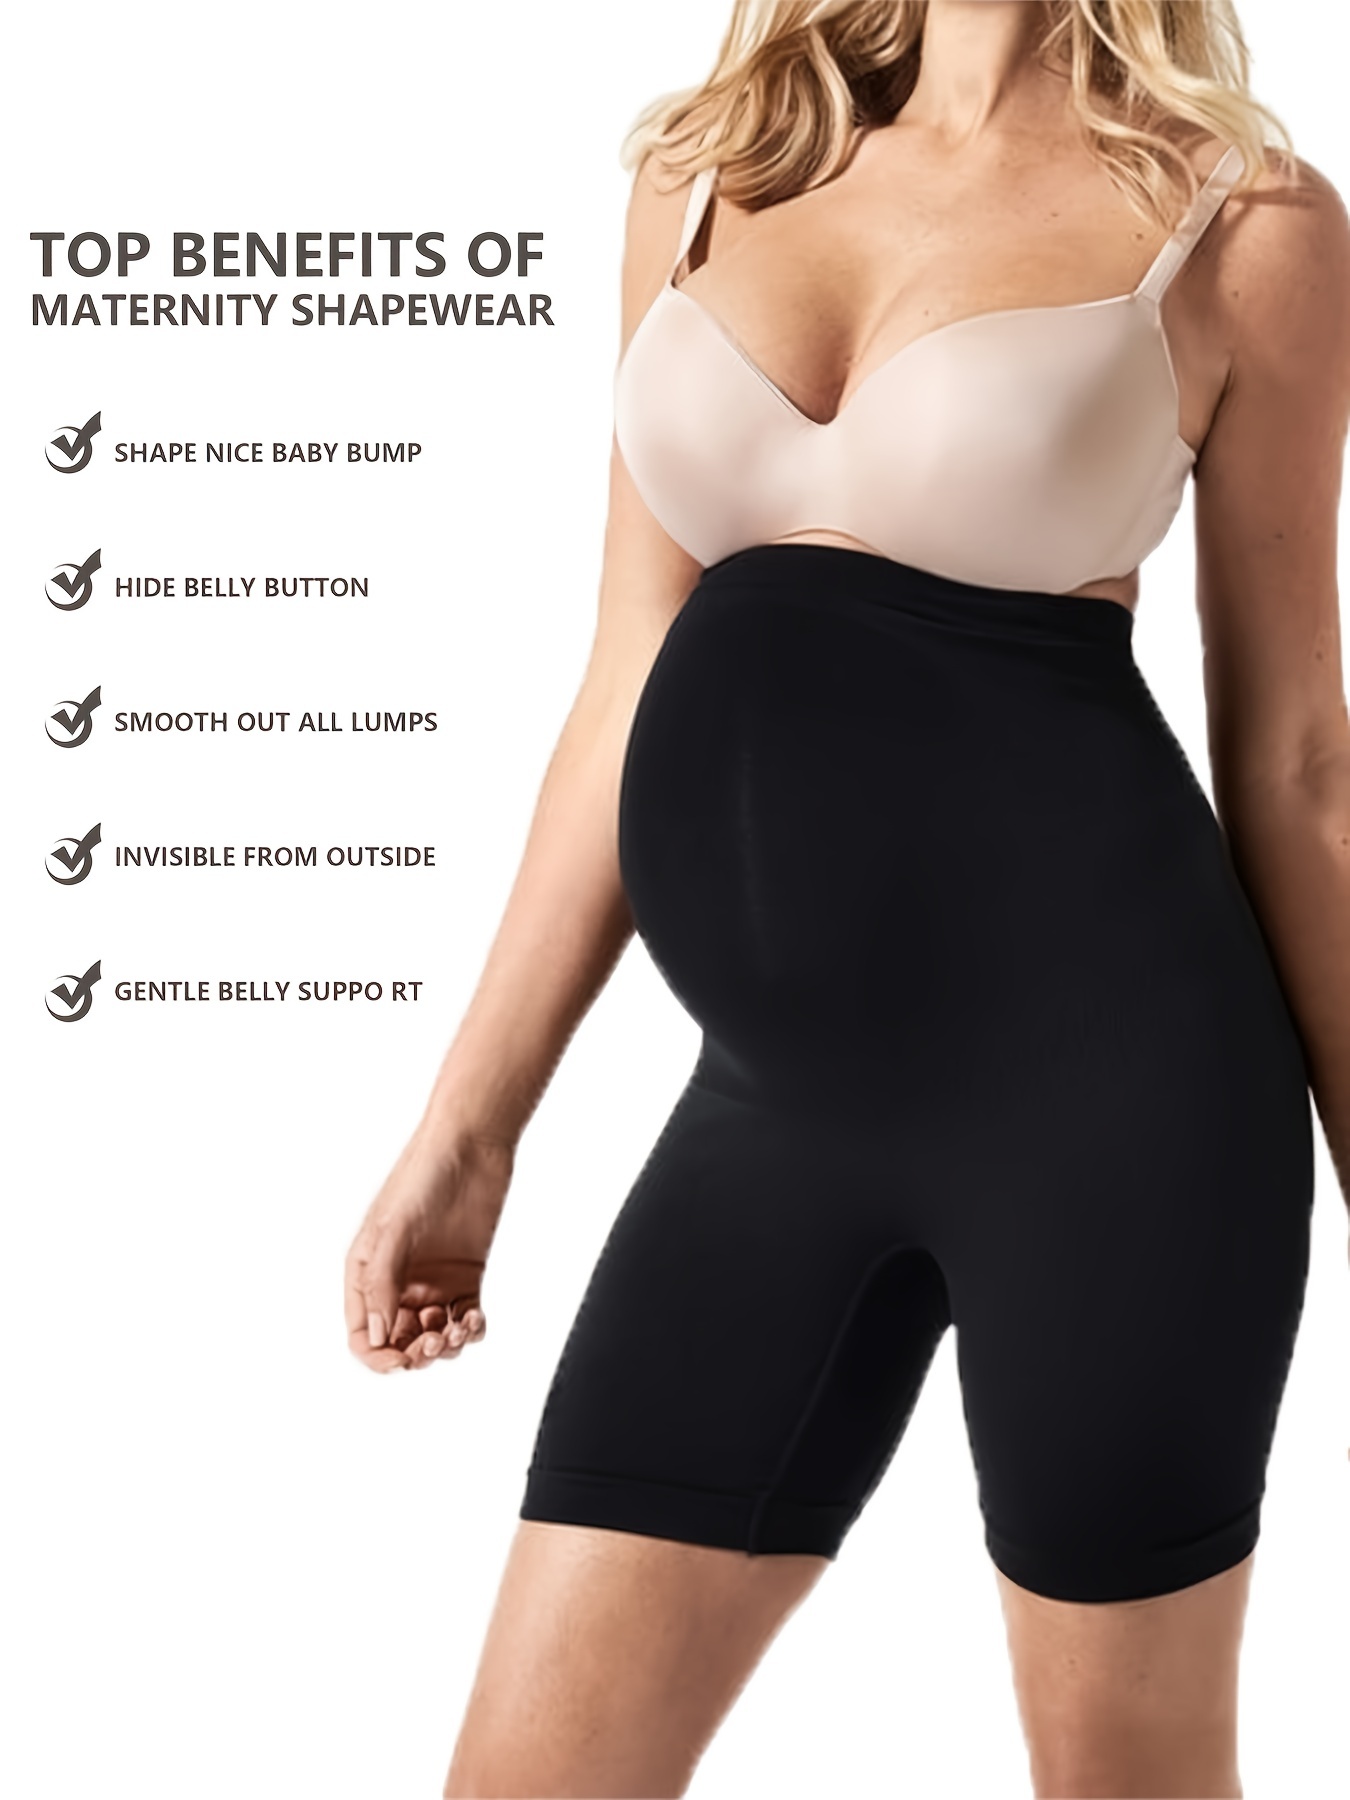 Shapewear for Maternity Actually Has Some Real Benefits